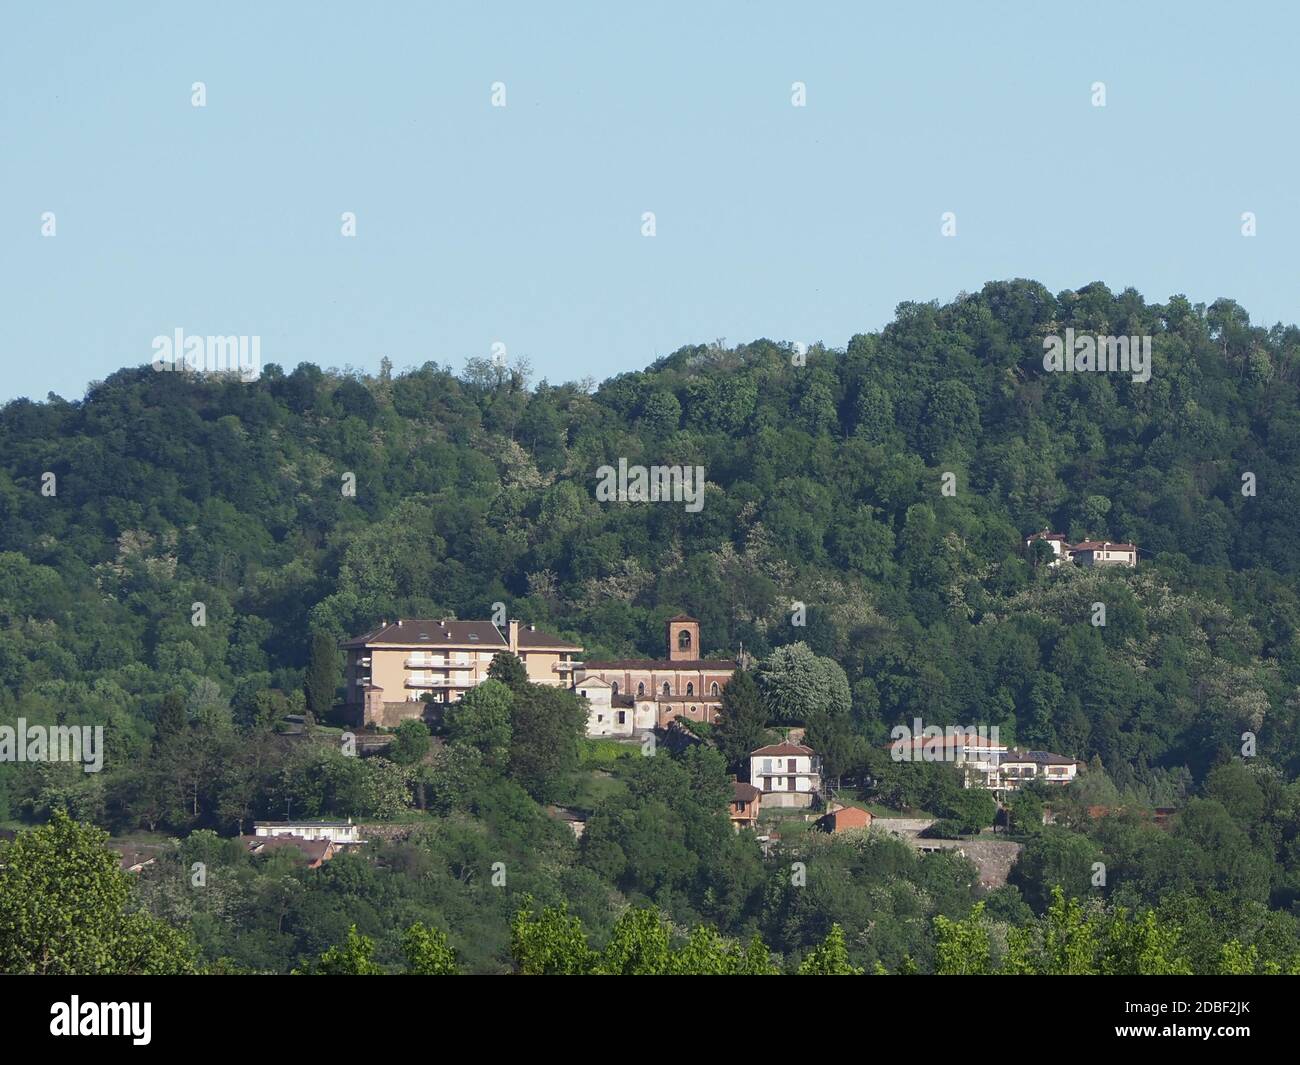 San Claudio High Resolution Stock Photography and Images - Alamy